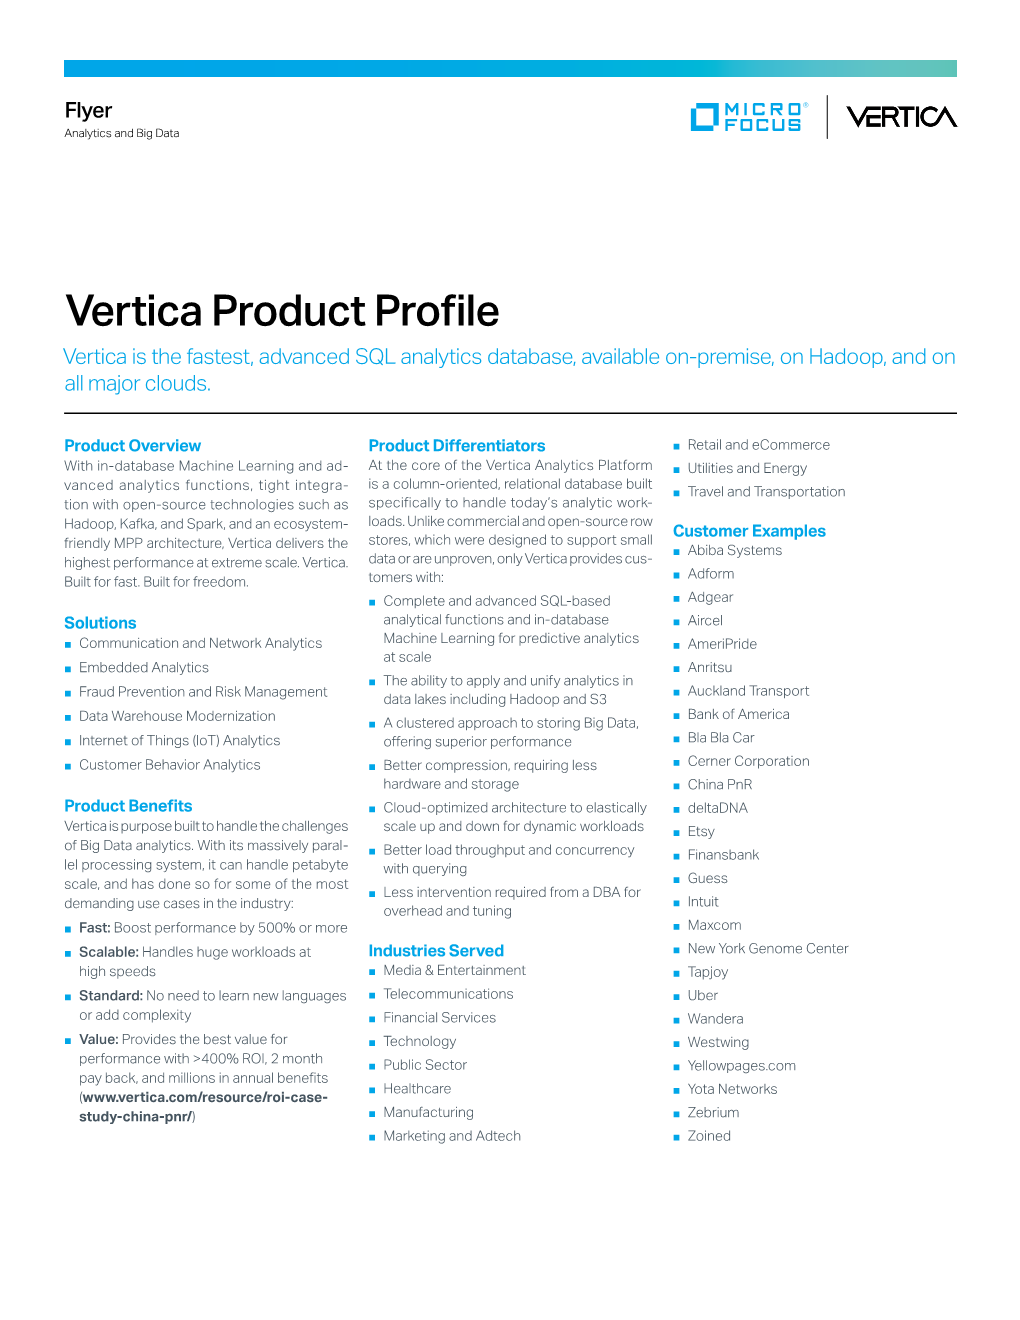 Vertica Product Profile Vertica Is the Fastest, Advanced SQL Analytics Database, Available On-Premise, on Hadoop, and on All Major Clouds